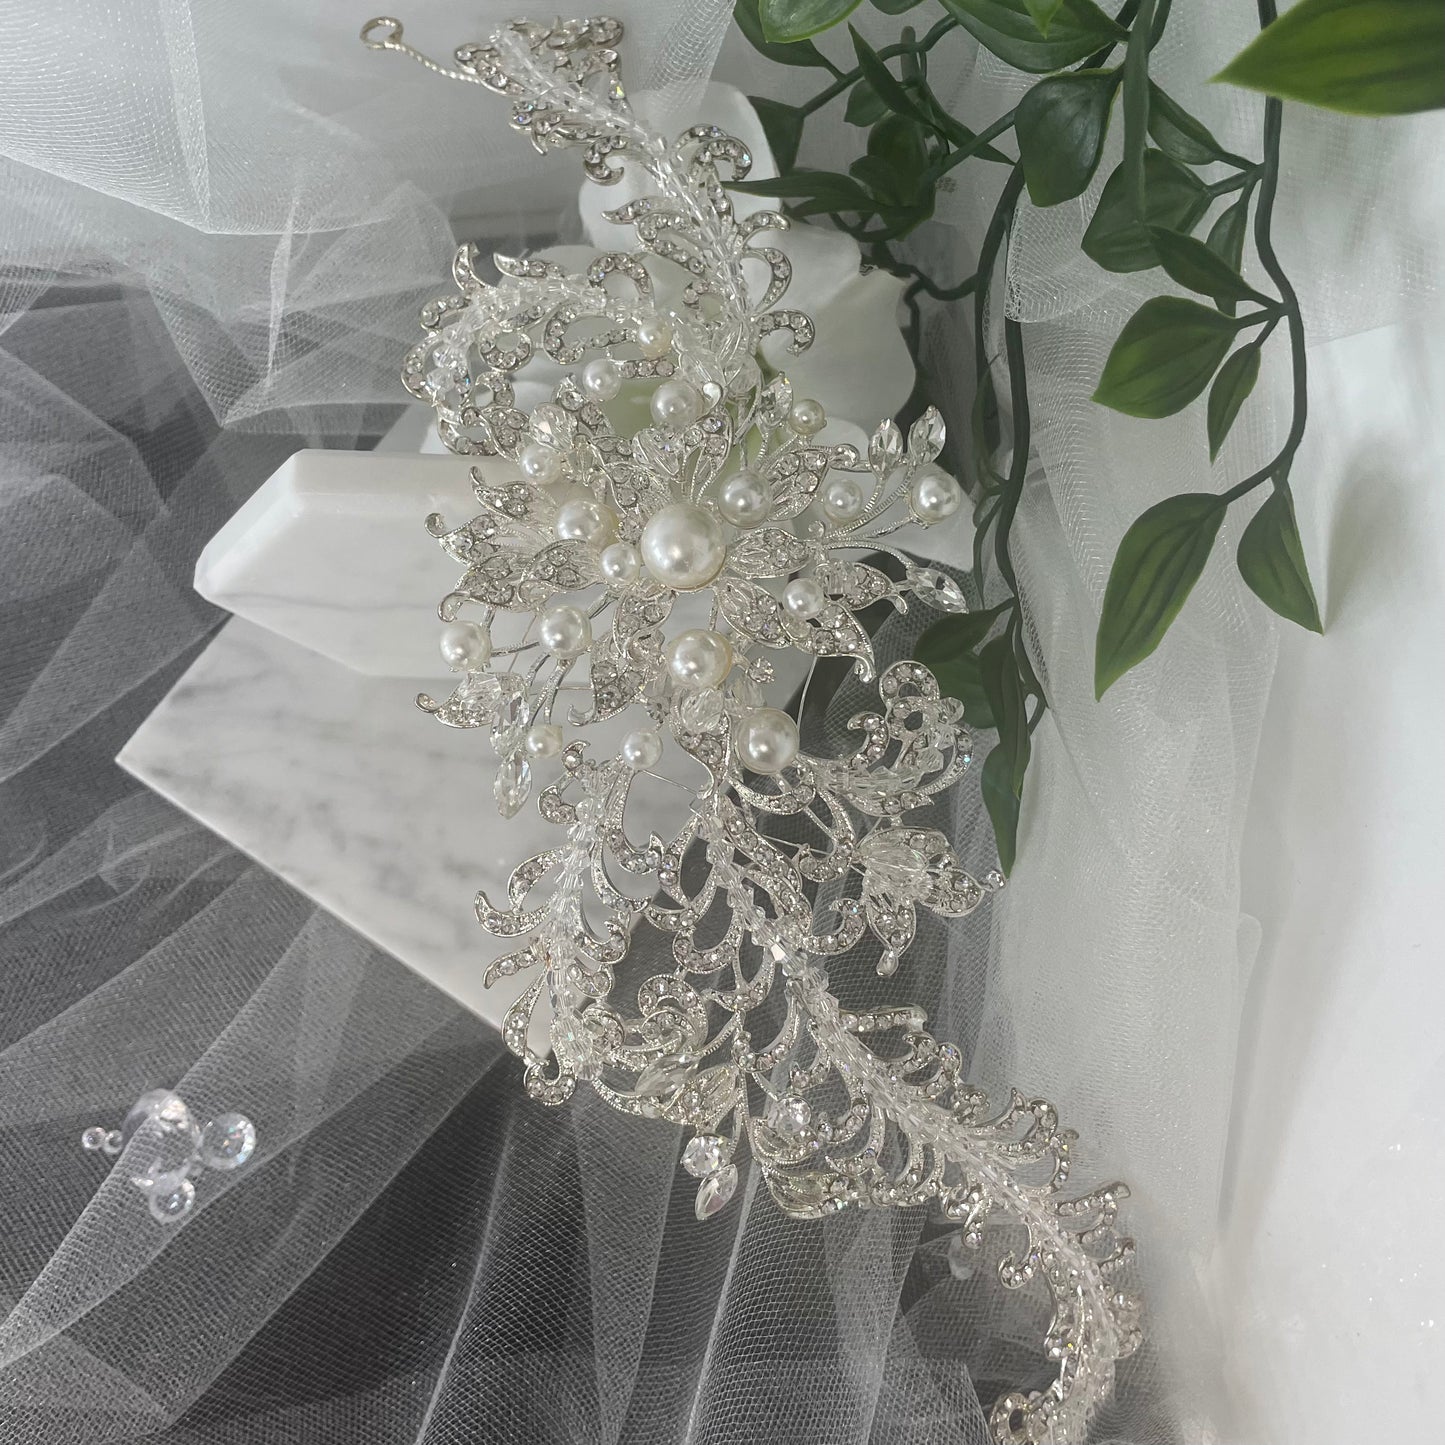 Elegant Harmony Bridal Headpiece in wave design, adorned with multi-size pearls, crystals, and Diamontes, available in silver and ivory, perfect for a statement wedding look.